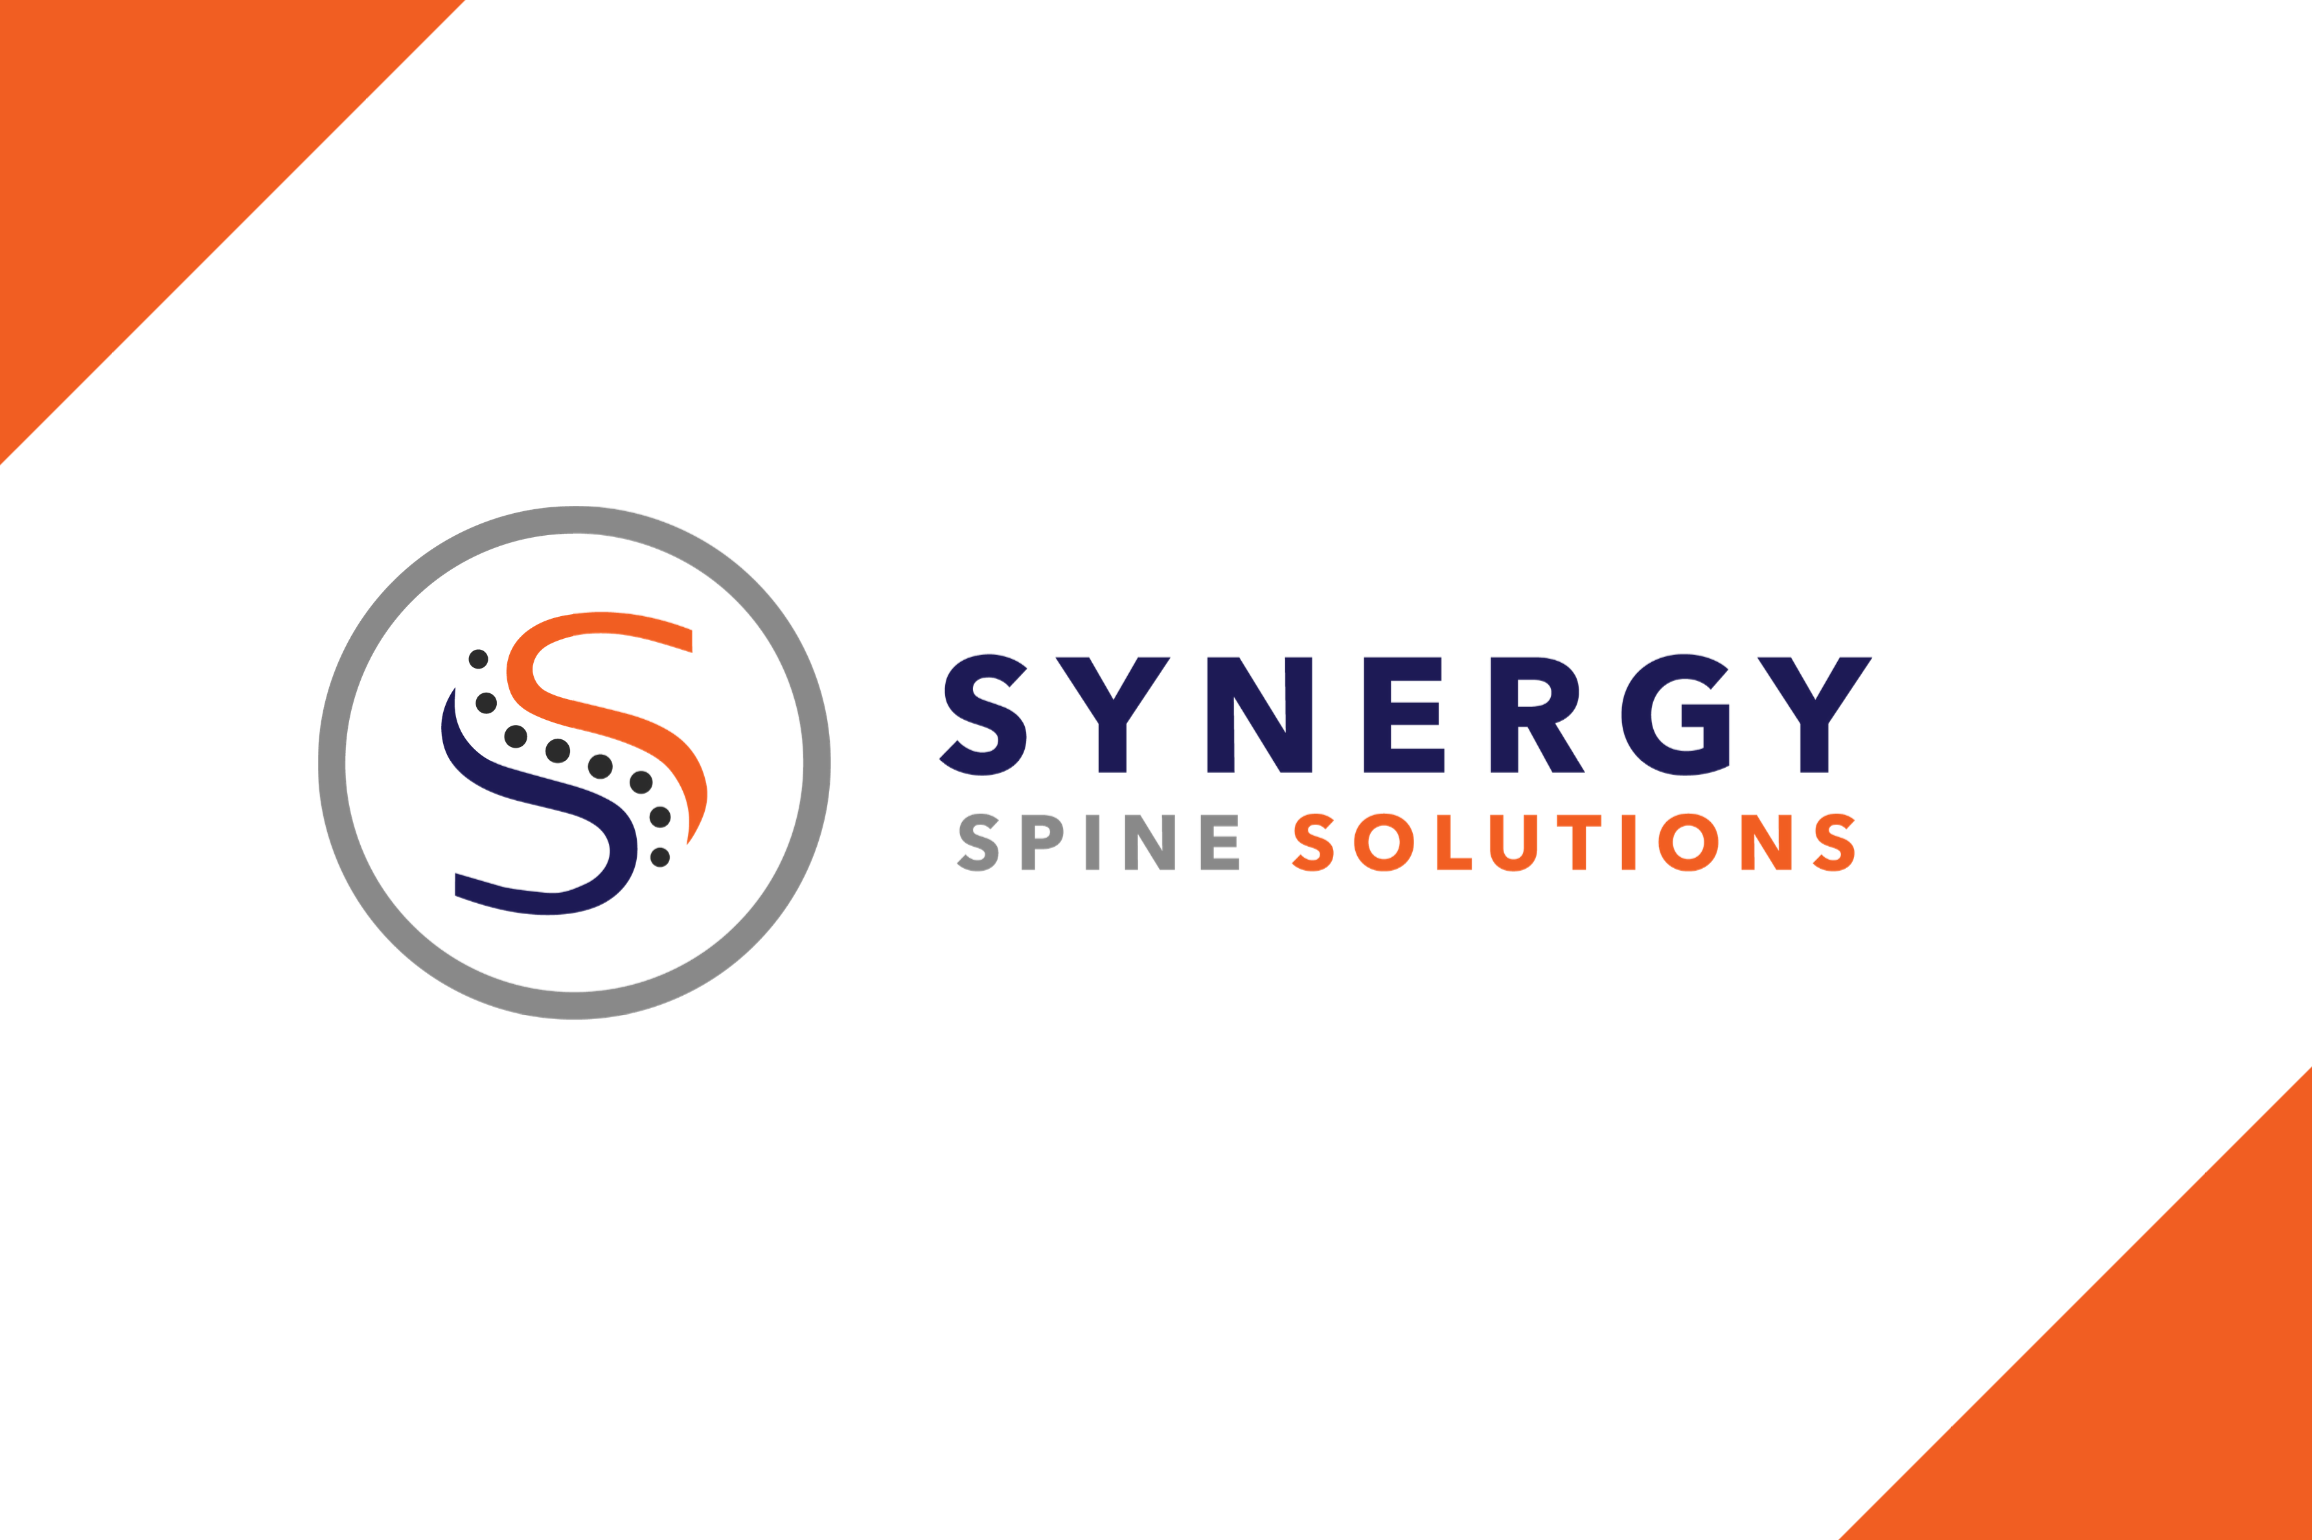 Synergy Spine Solutions